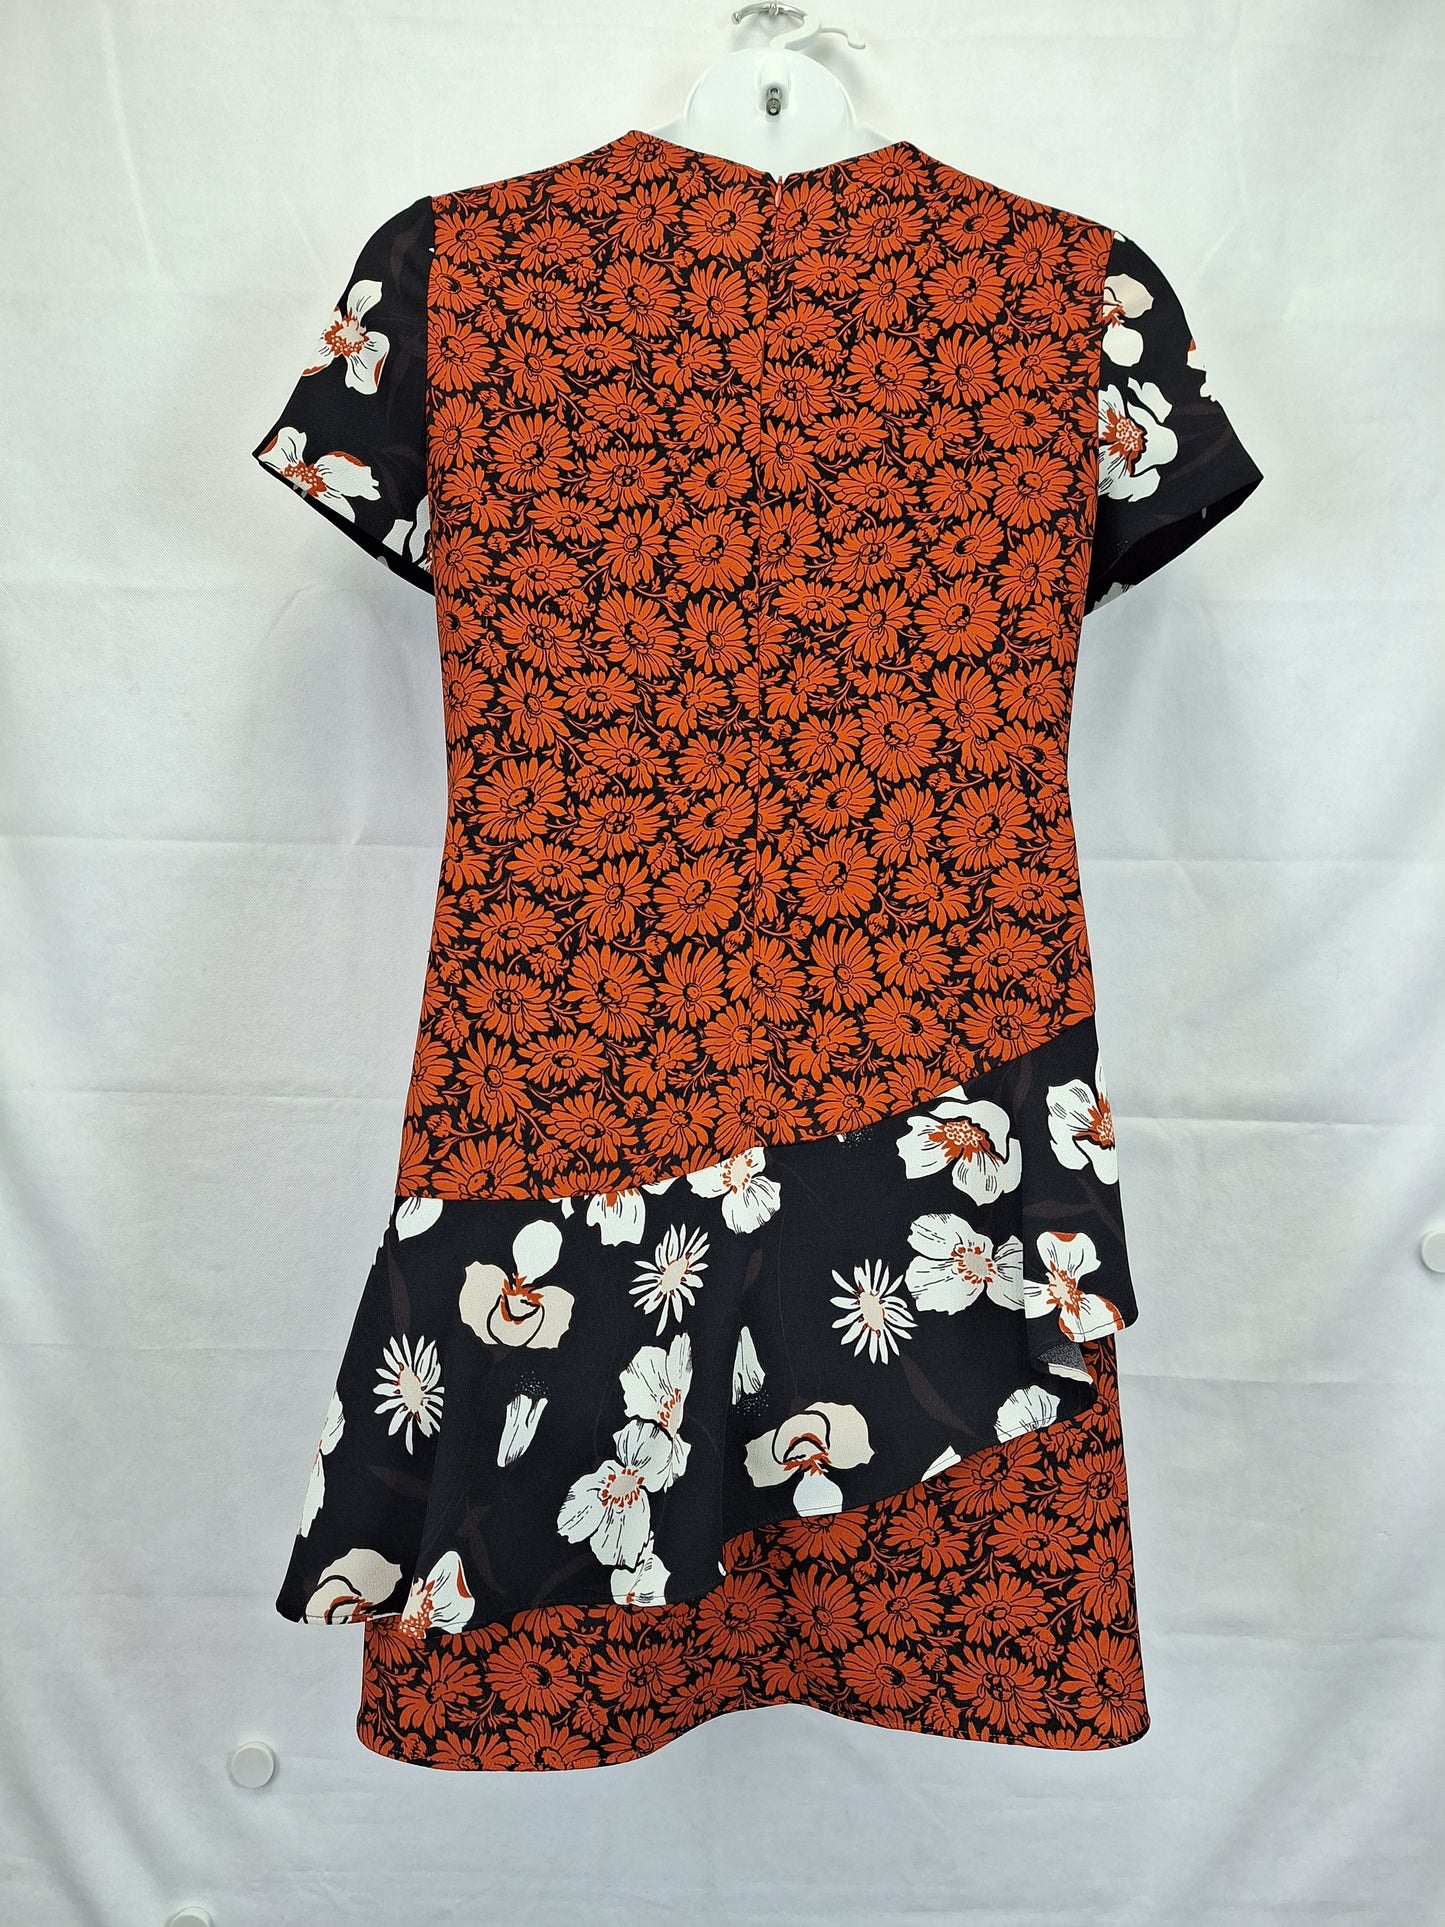 Veronika Maine Dual Floral Pattern Midi Dress Size 16 by SwapUp-Online Second Hand Store-Online Thrift Store